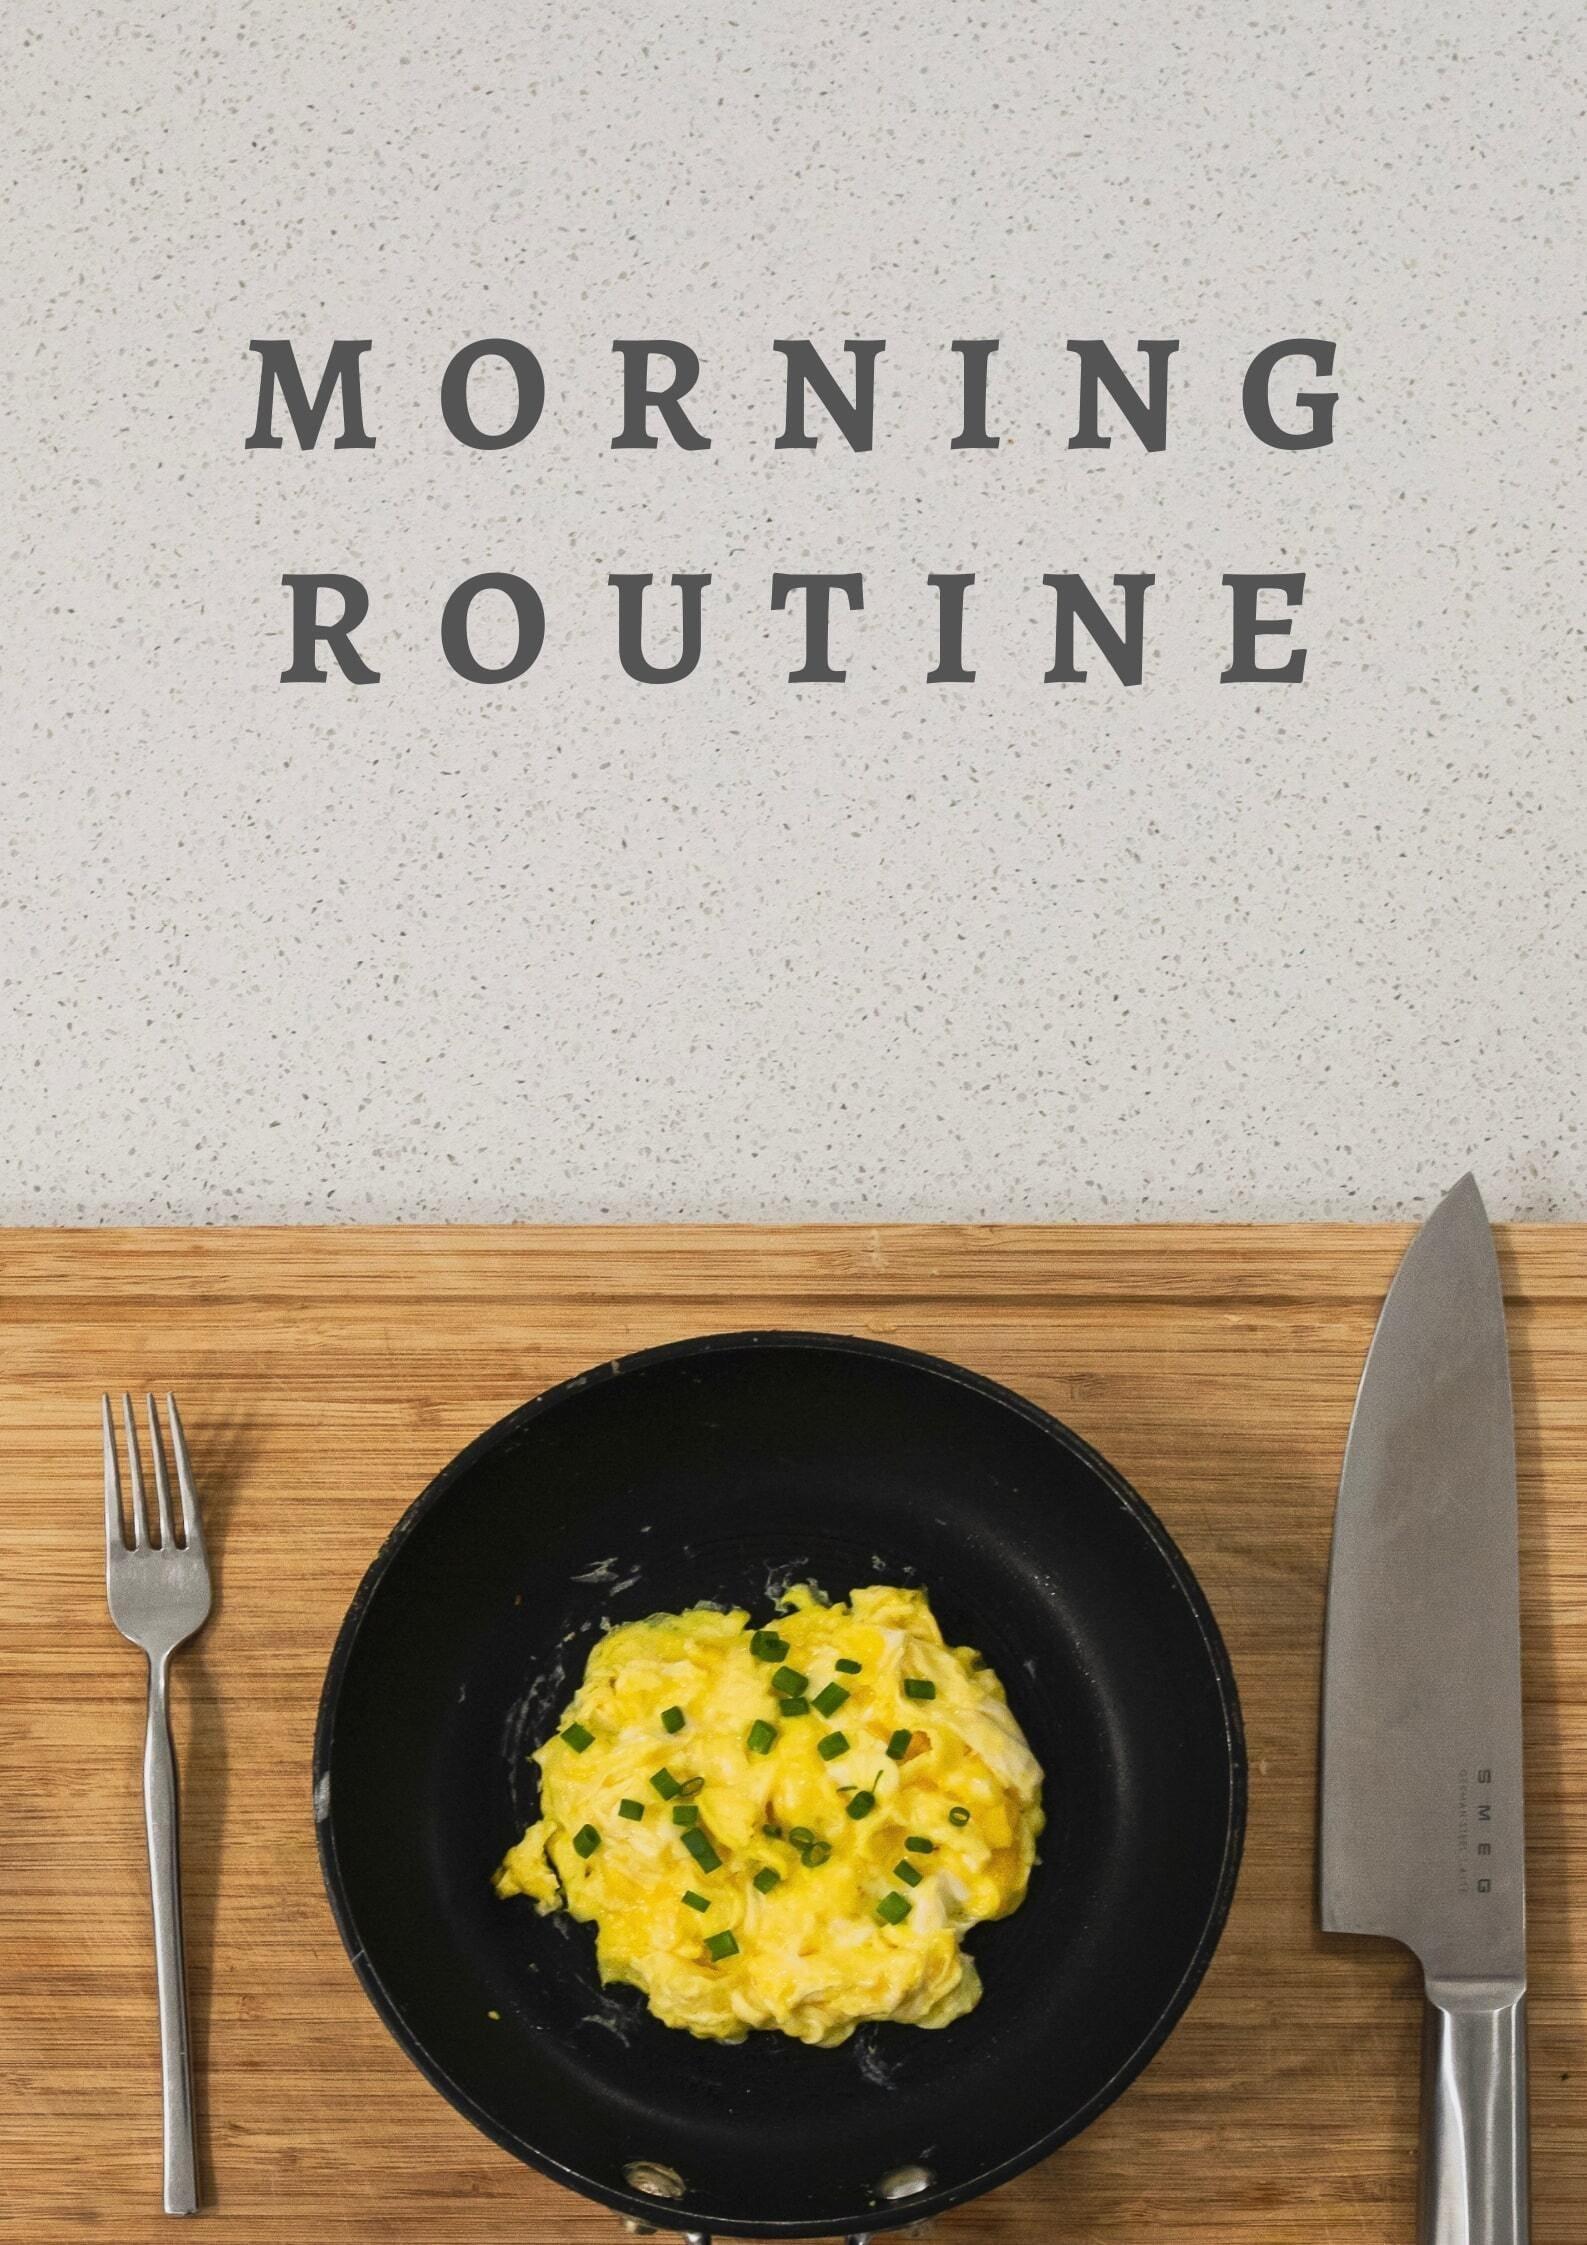 Morning Routine poster